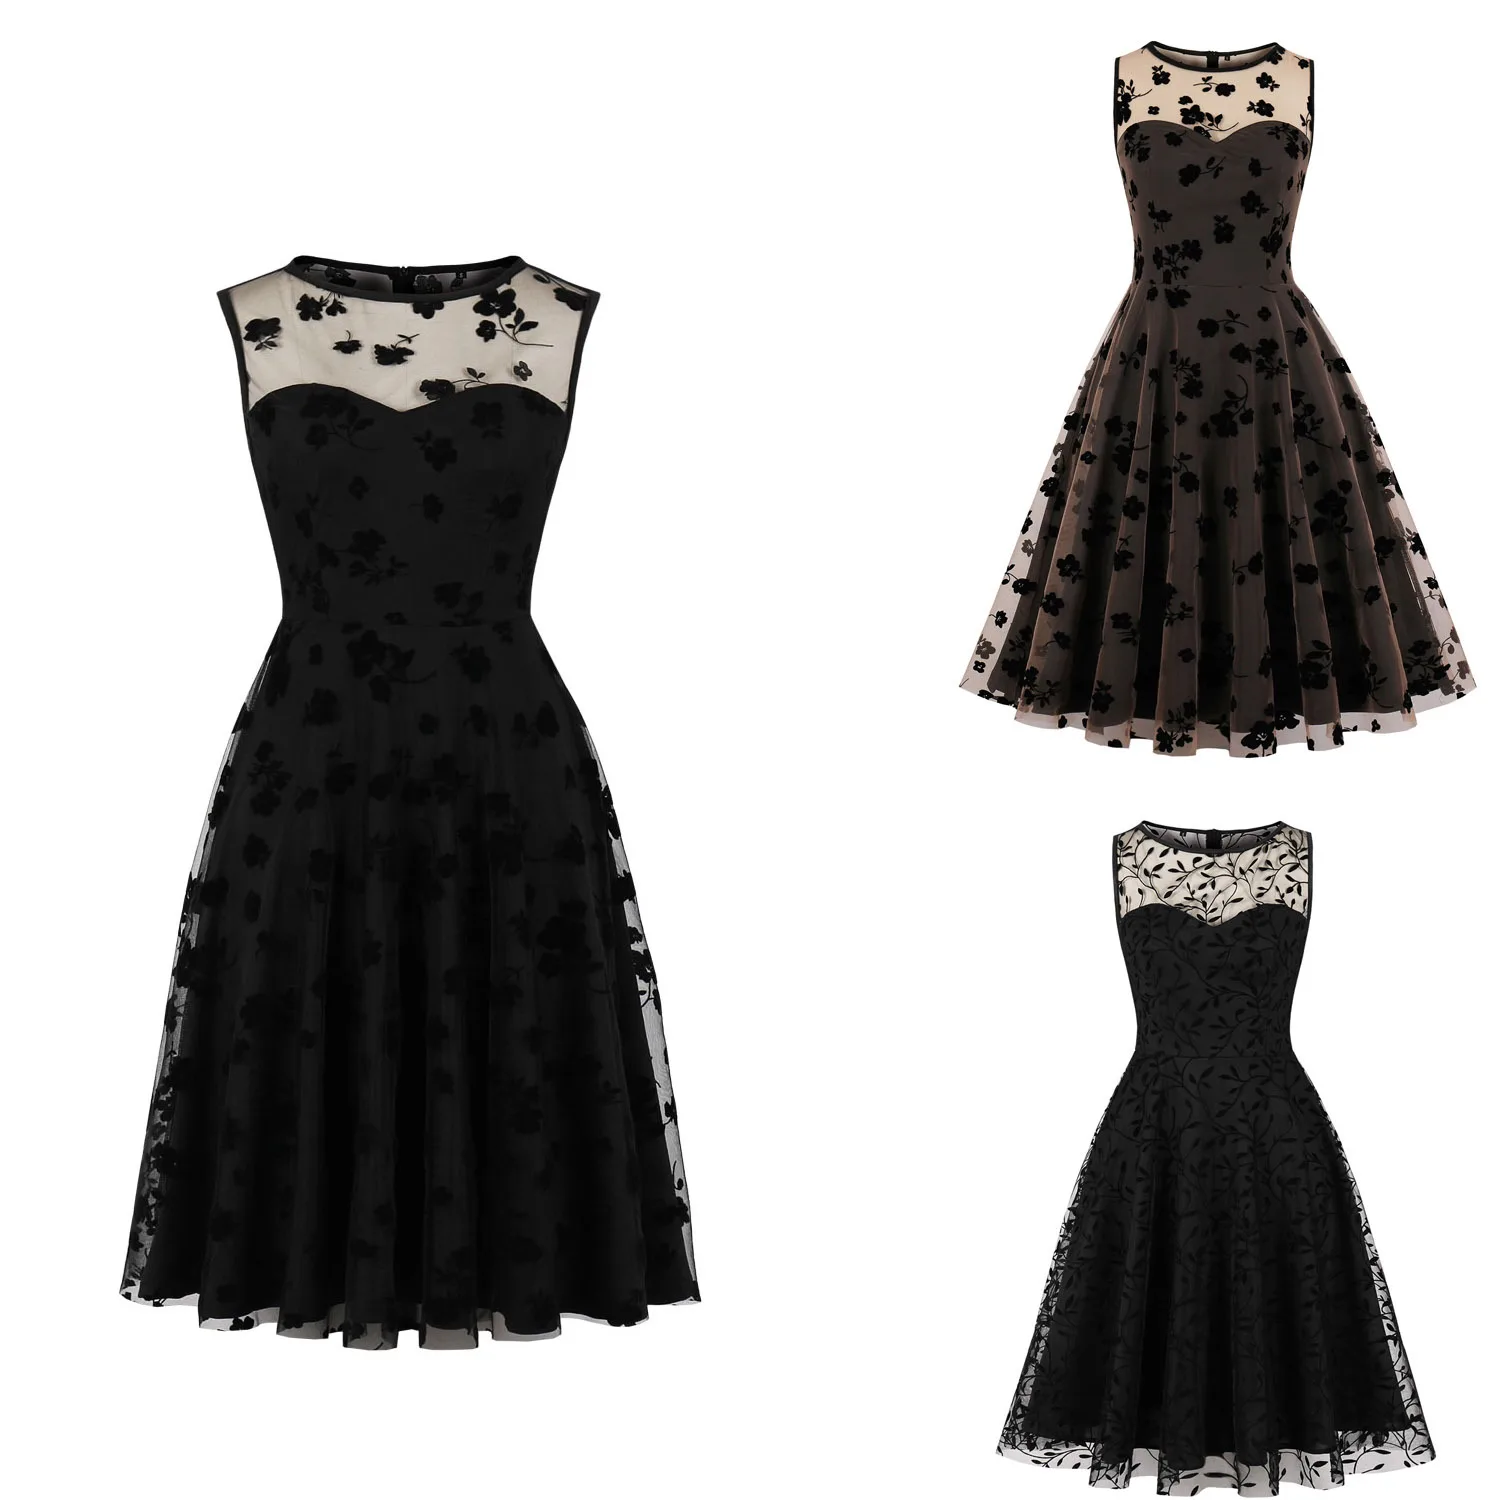 

Women's 1950s Vintage Party Dress Sleeveless Mesh Embroidery Covered-up Evening Prom Dress